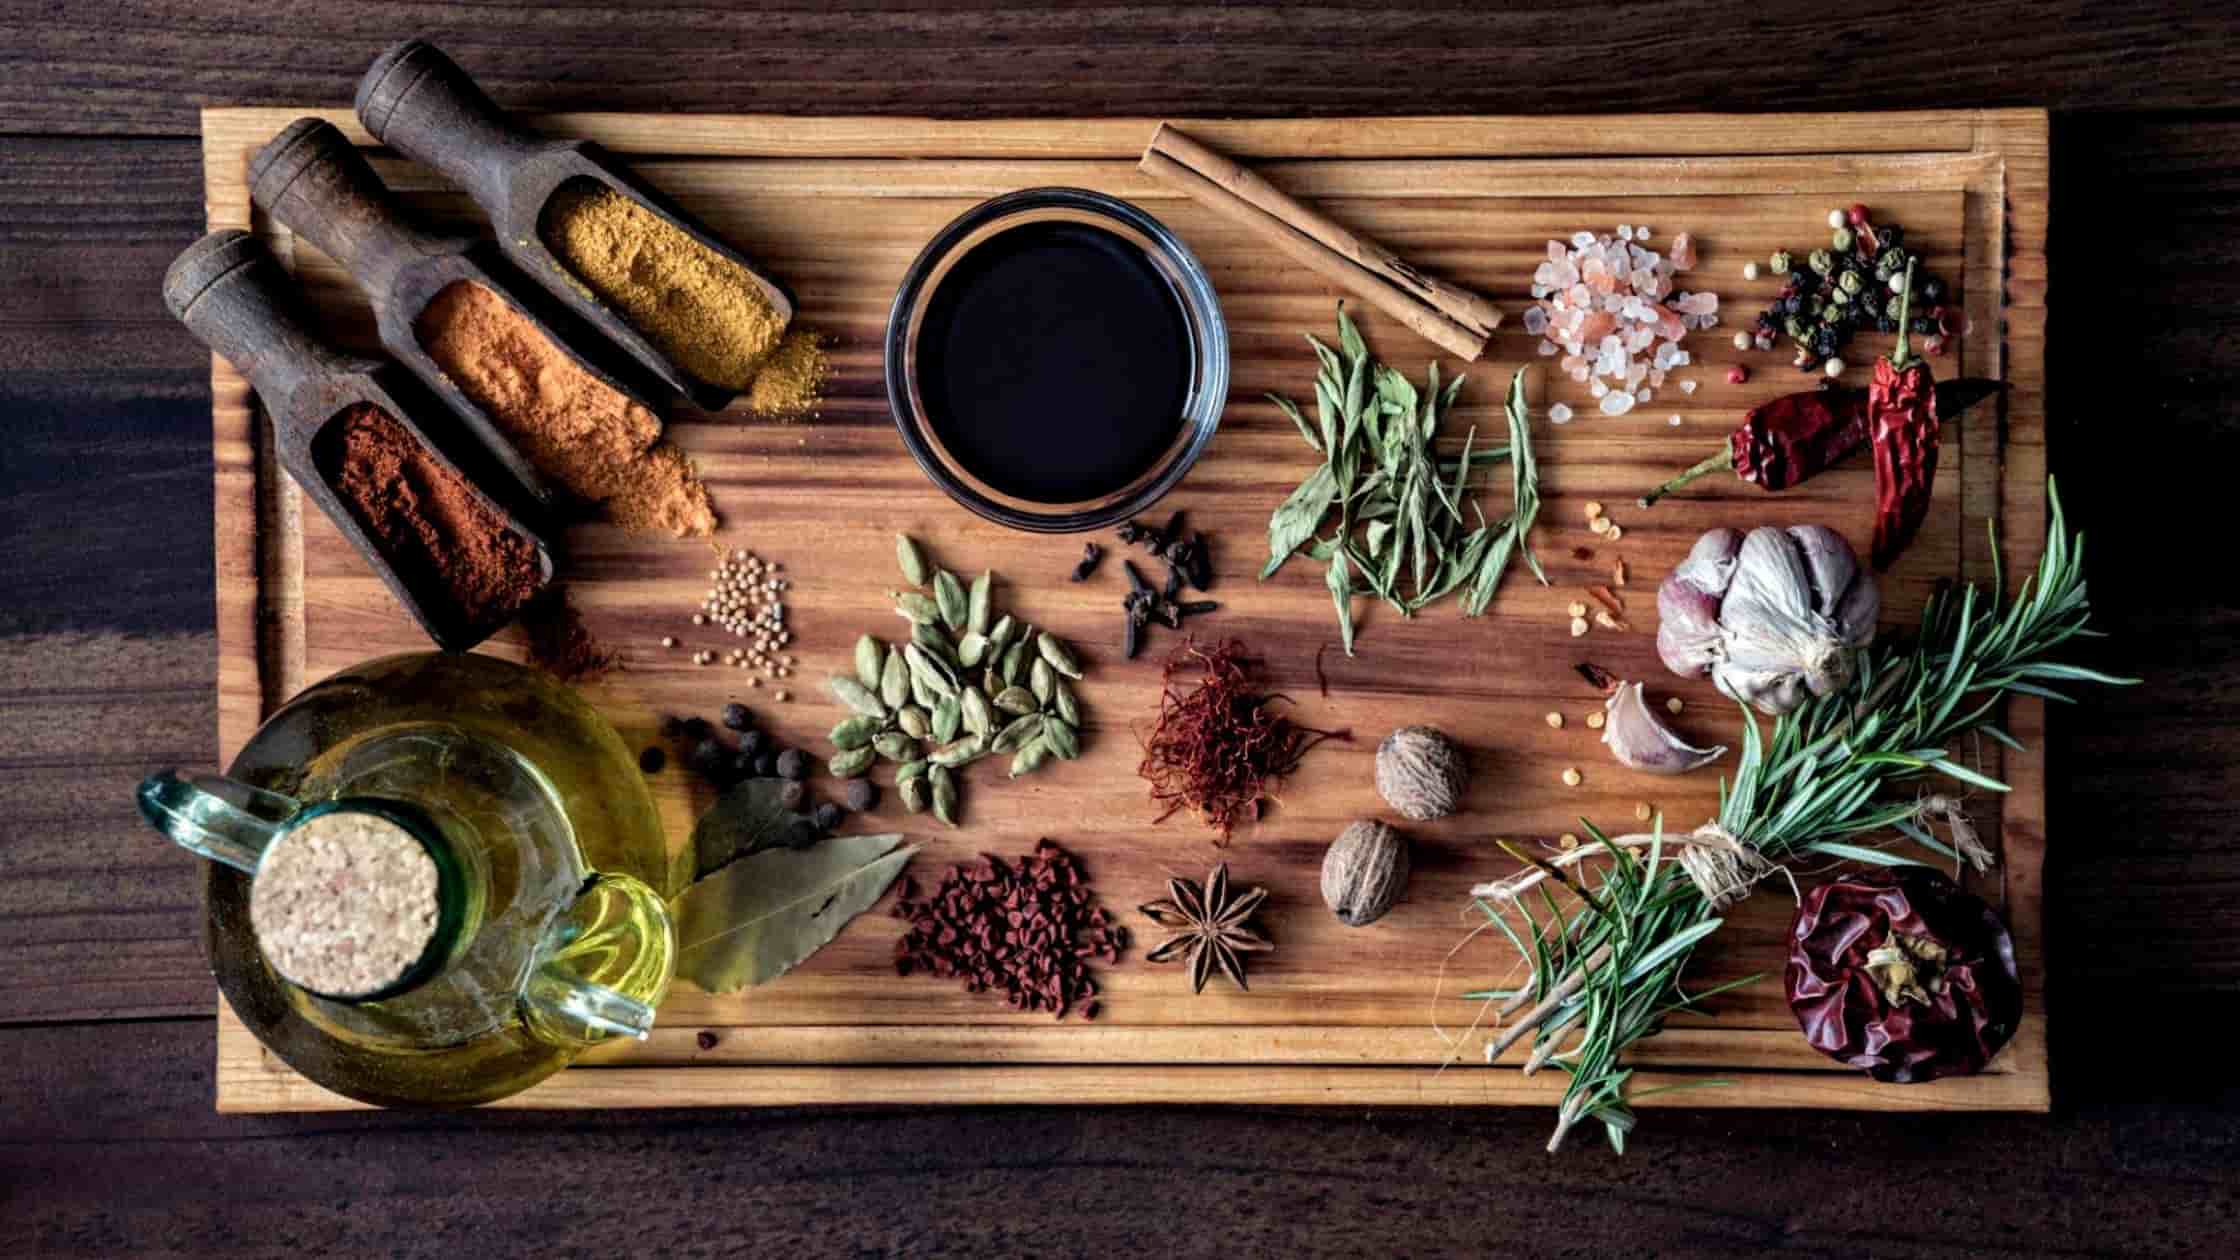 Best Herbs And Spices For Memory And Brain Health – Does It Work?